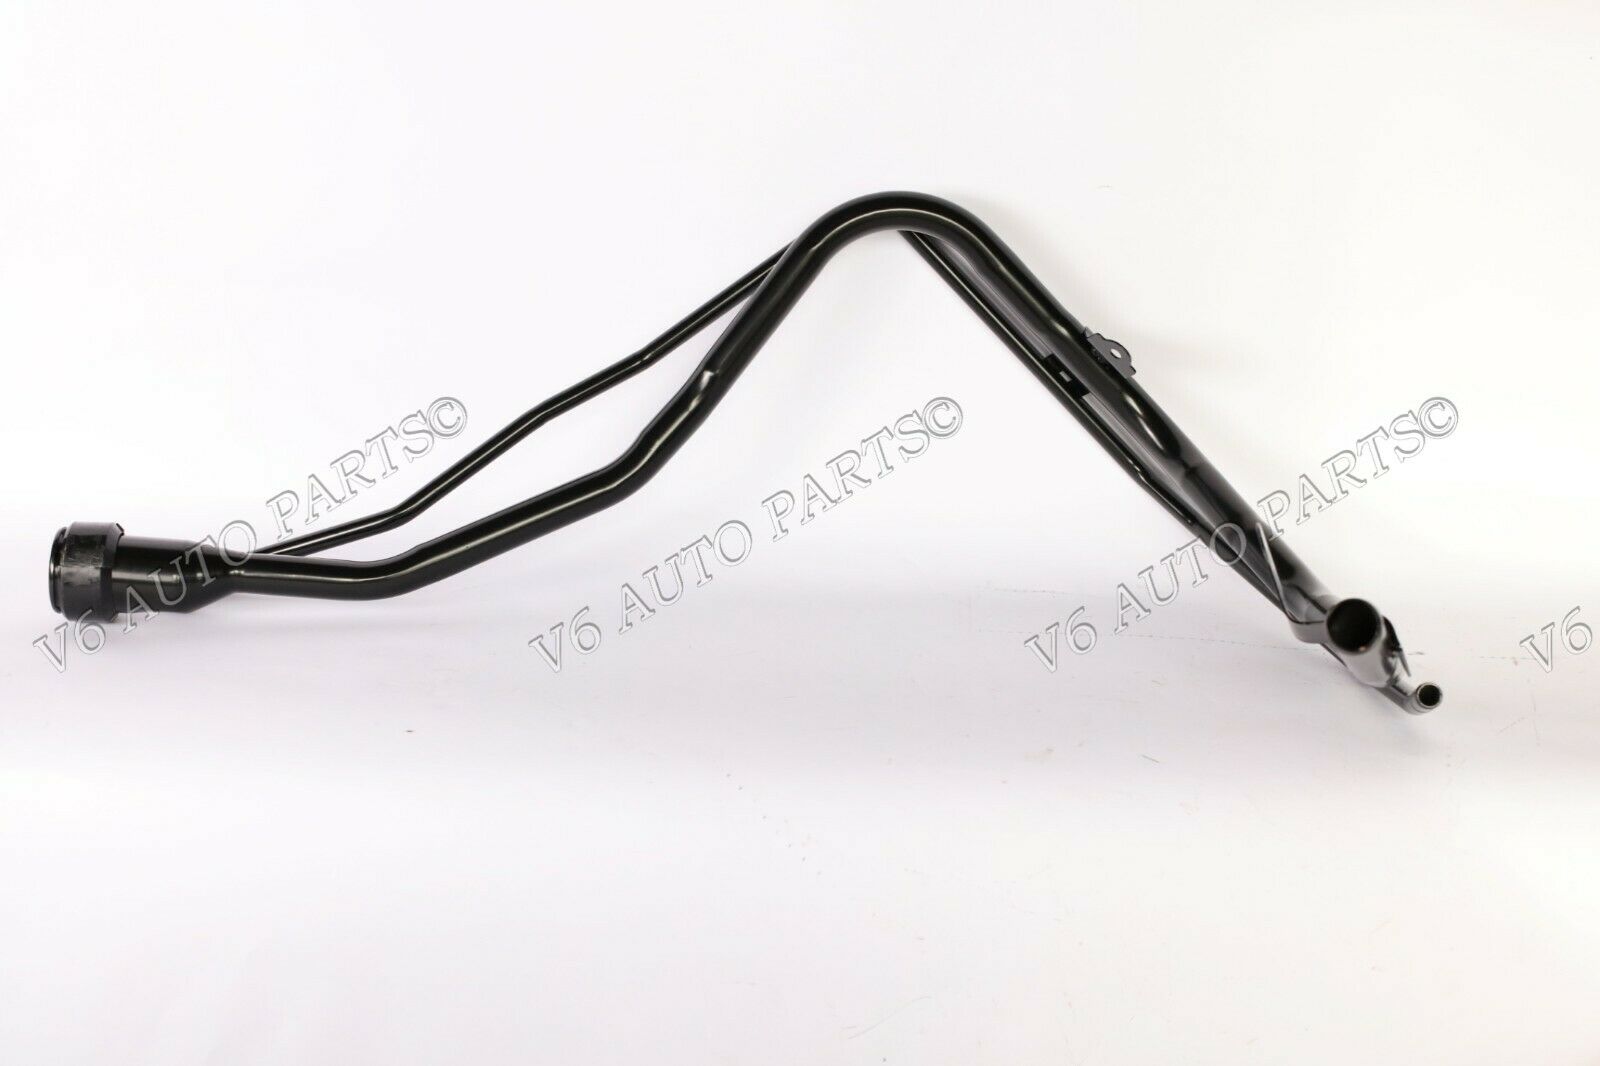 FUEL TANK FILLER NECK PIPE FOR 2008 - 2015 LEXUS RX350 AWD Free & Fast Shipping